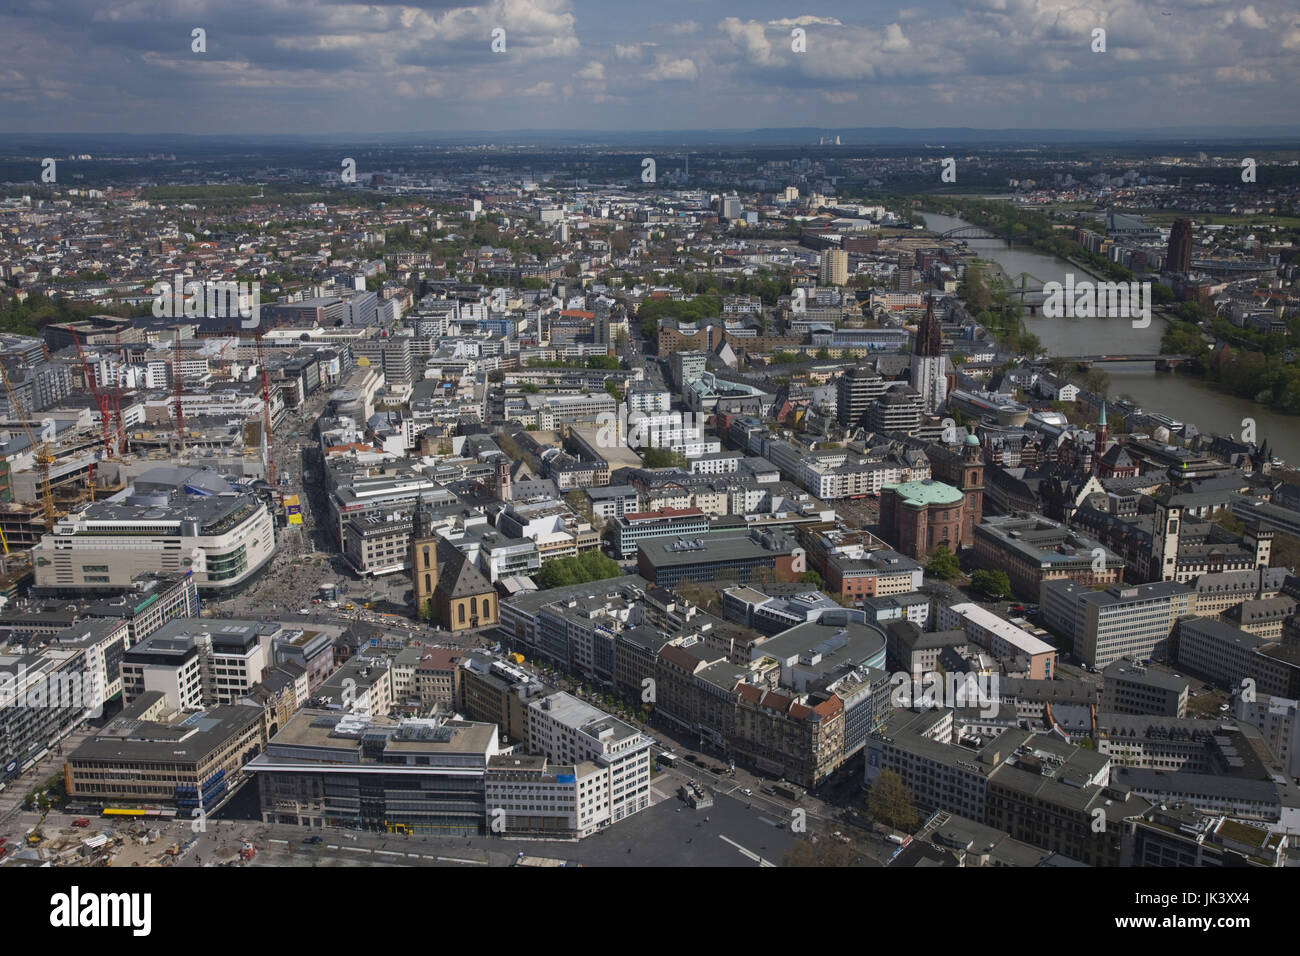 Germany, Hessen, Frankfurt am Main, Main Tower view, Hauptwache square and Zeil shopping district, Stock Photo